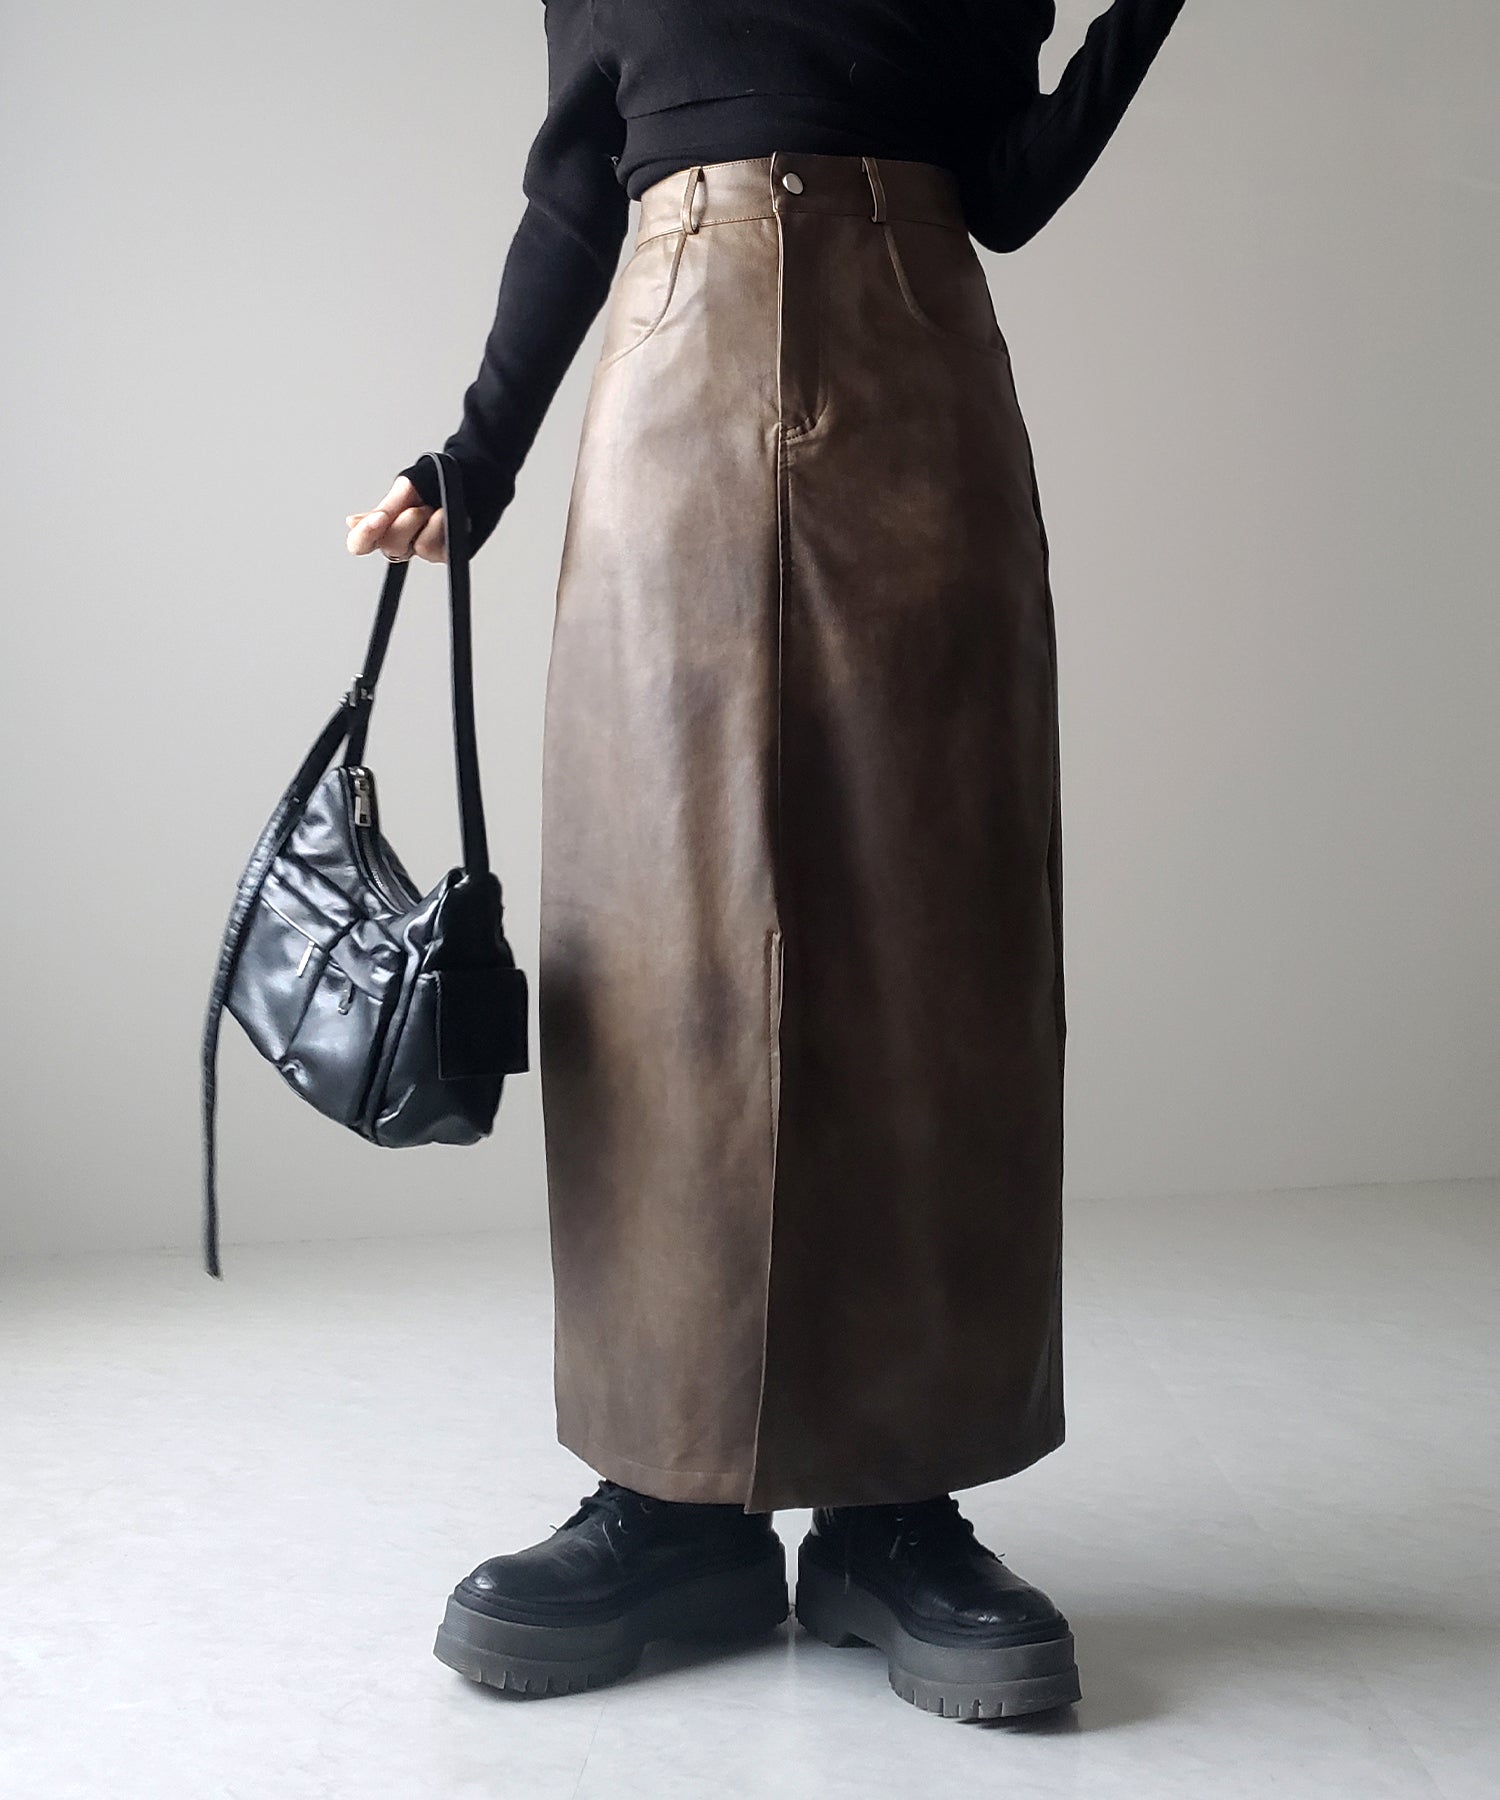 Pin on vintage leather skirt suit